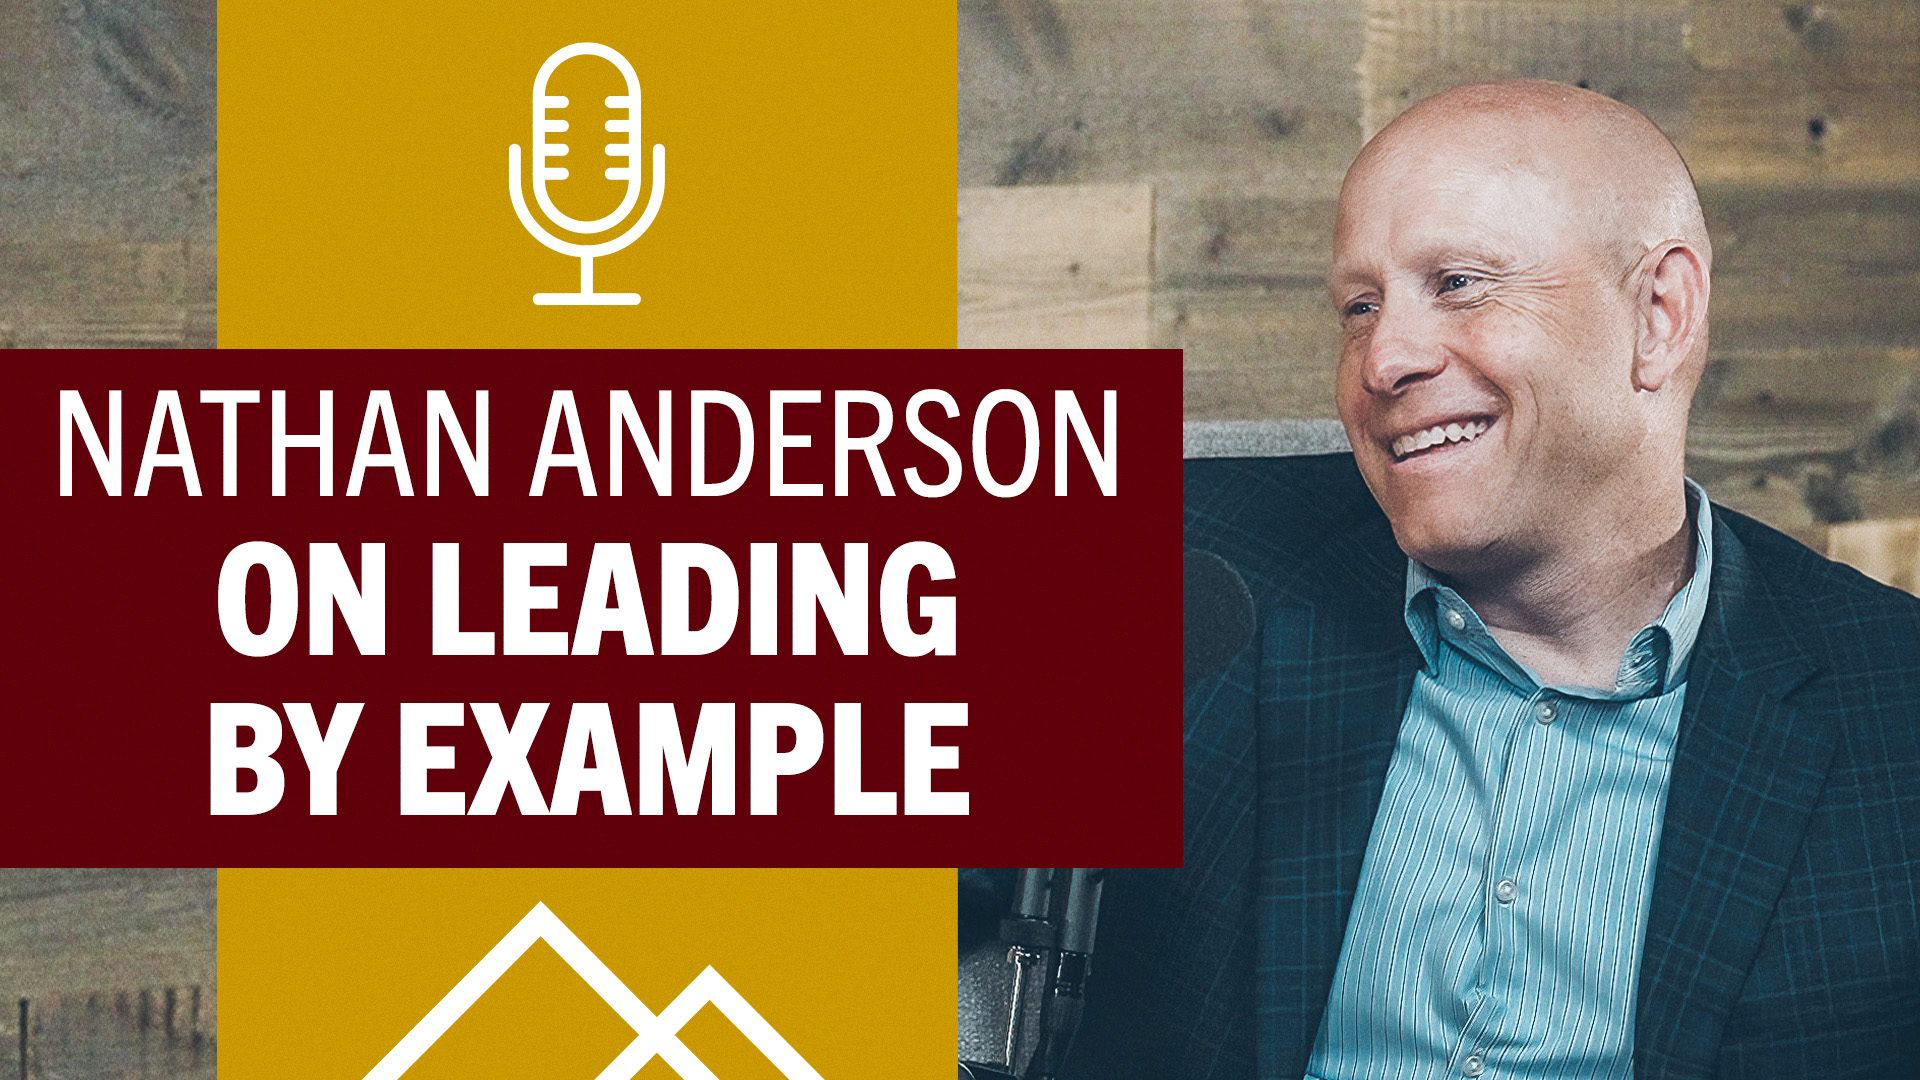 Nathan Anderson in front of podcast microphone with text "Nathan Anderson on Leading by Example"